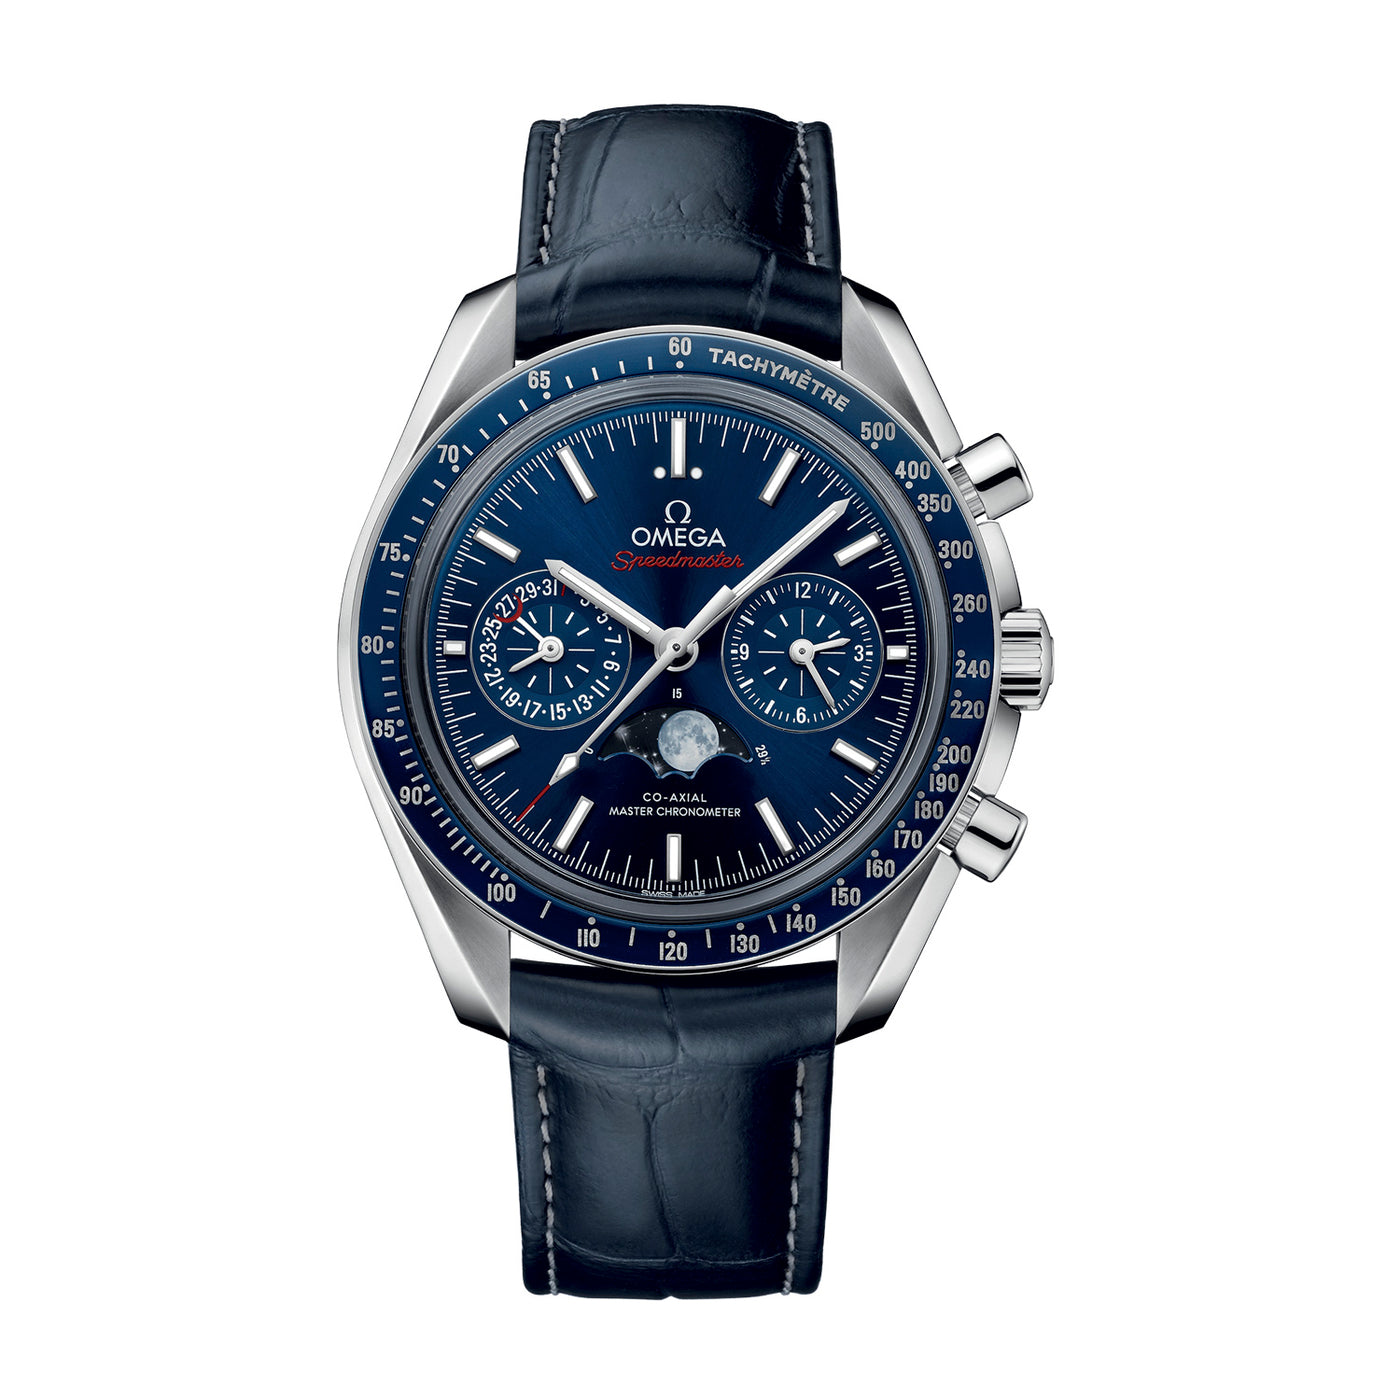 OMEGA Speedmaster Two Counters Moonphase Automatic – 304.33.44.52.03.001